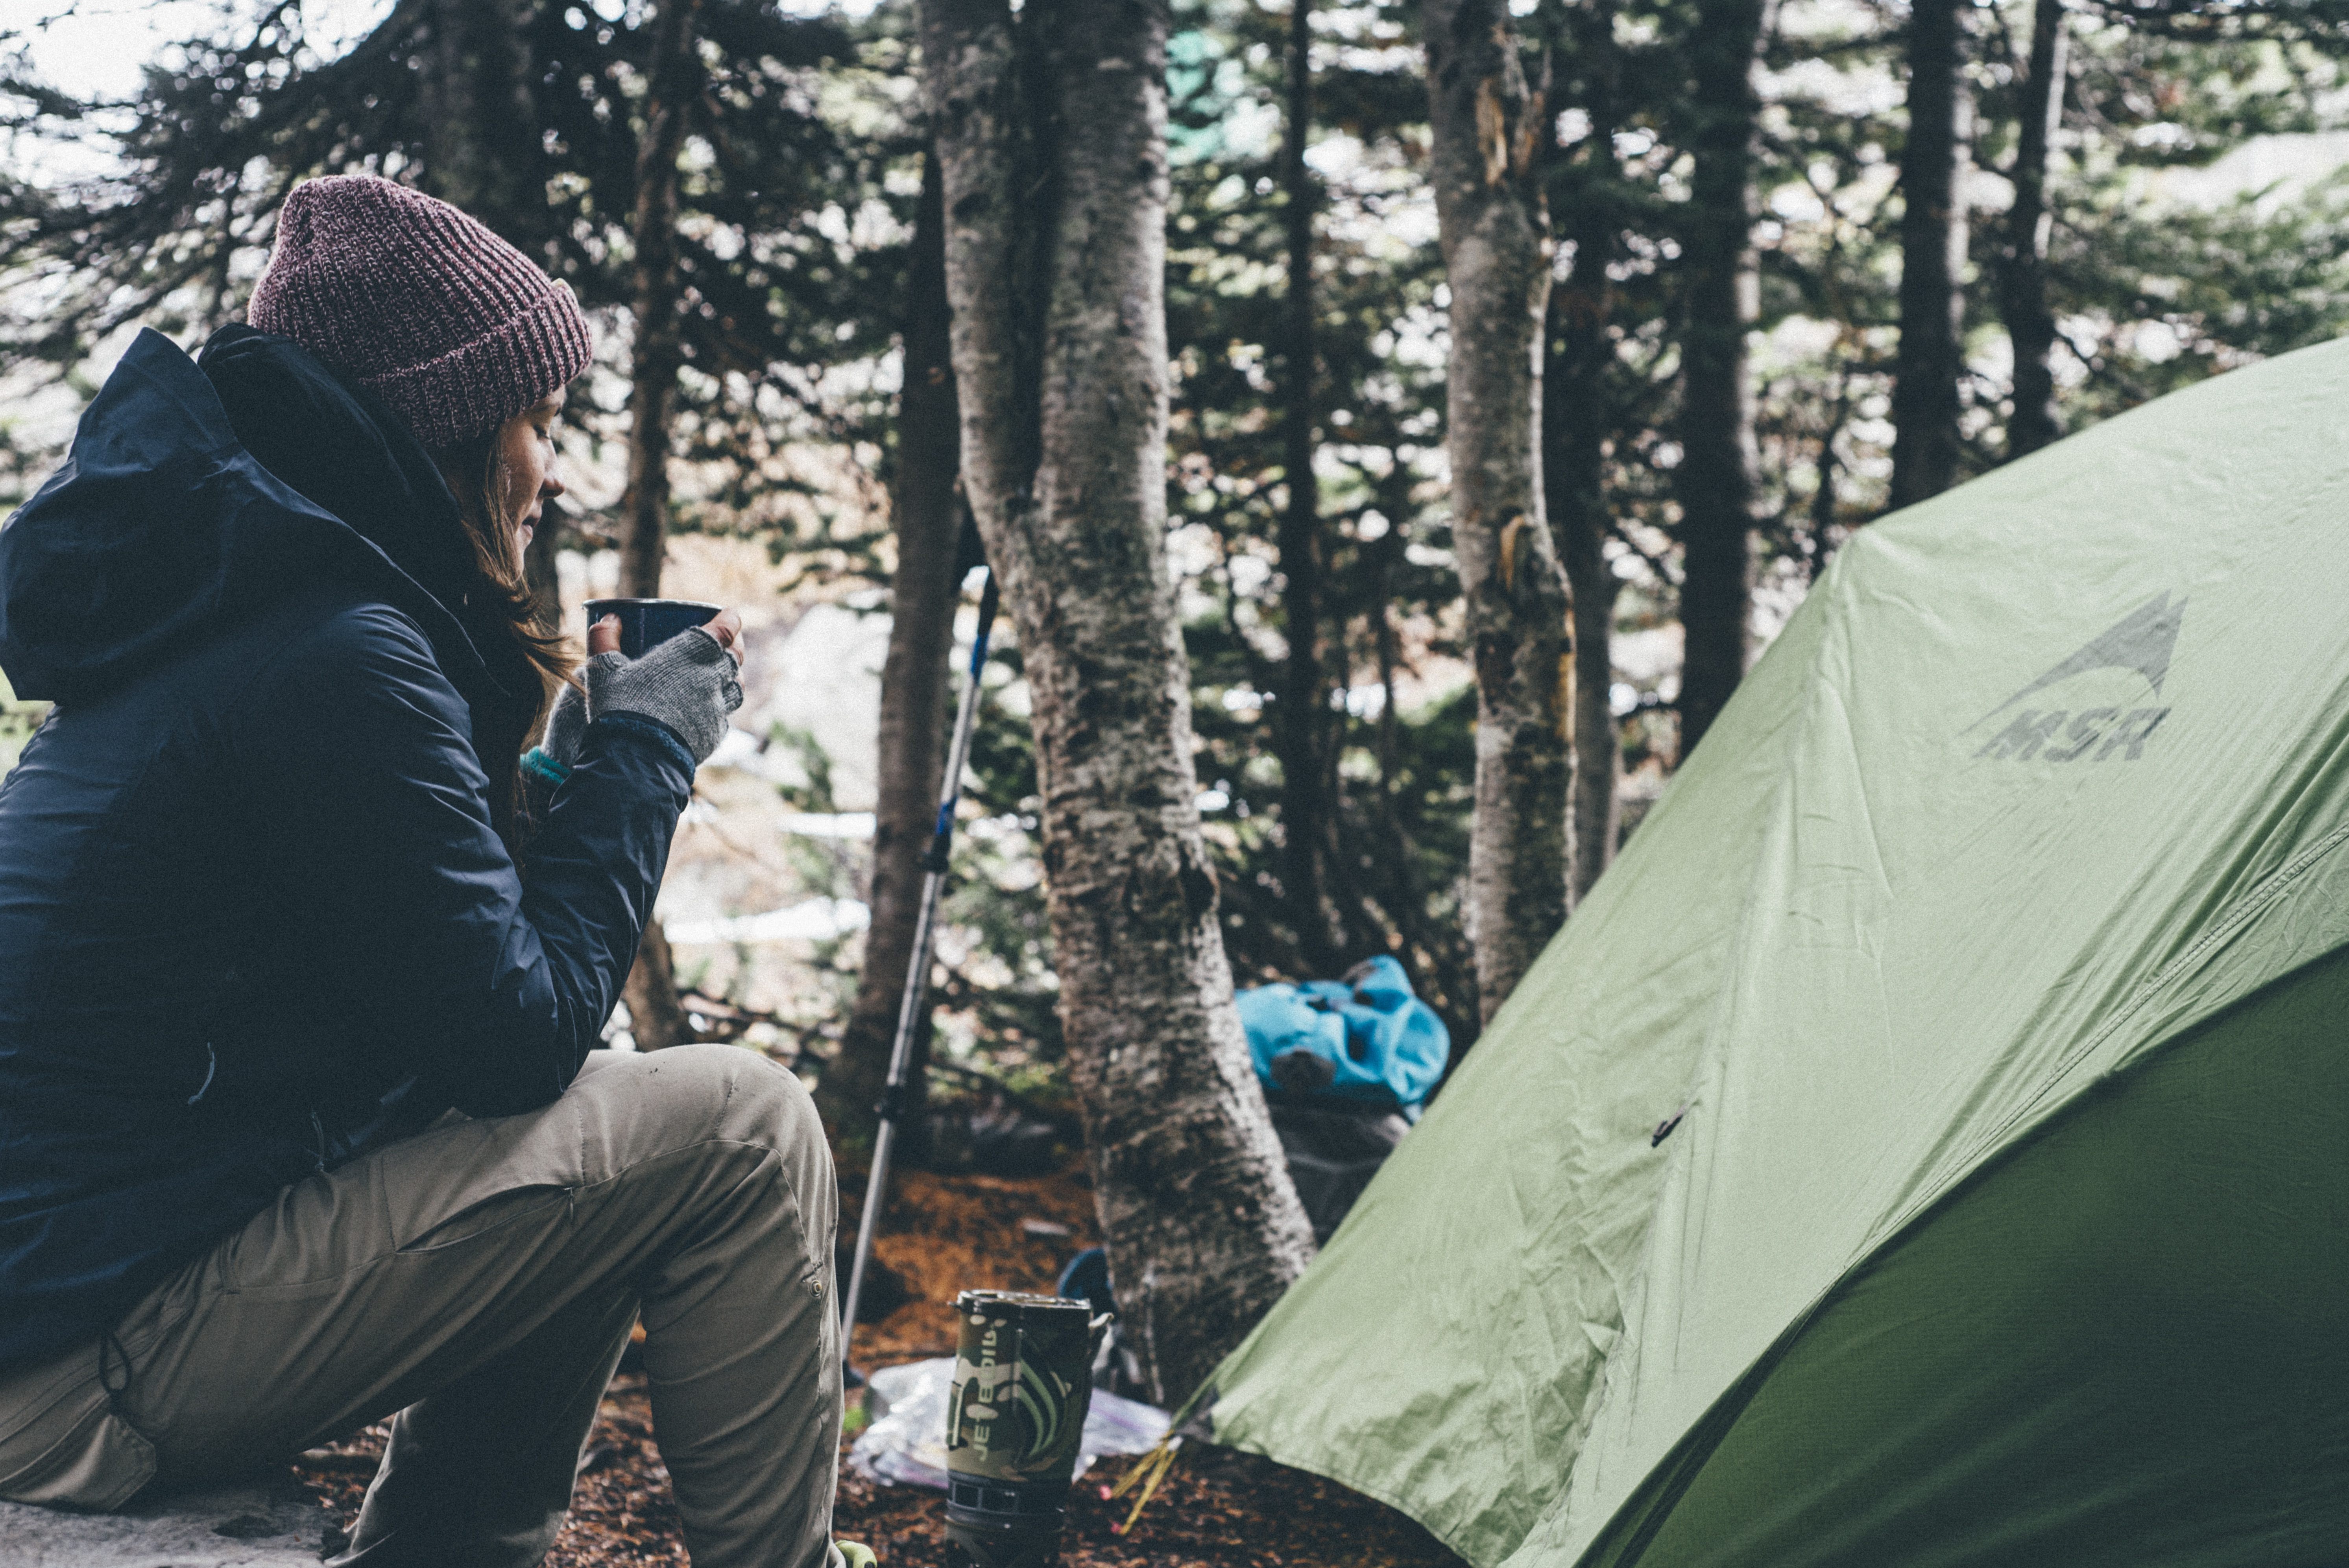 11+ Essentials For Stress-Free Family Camping